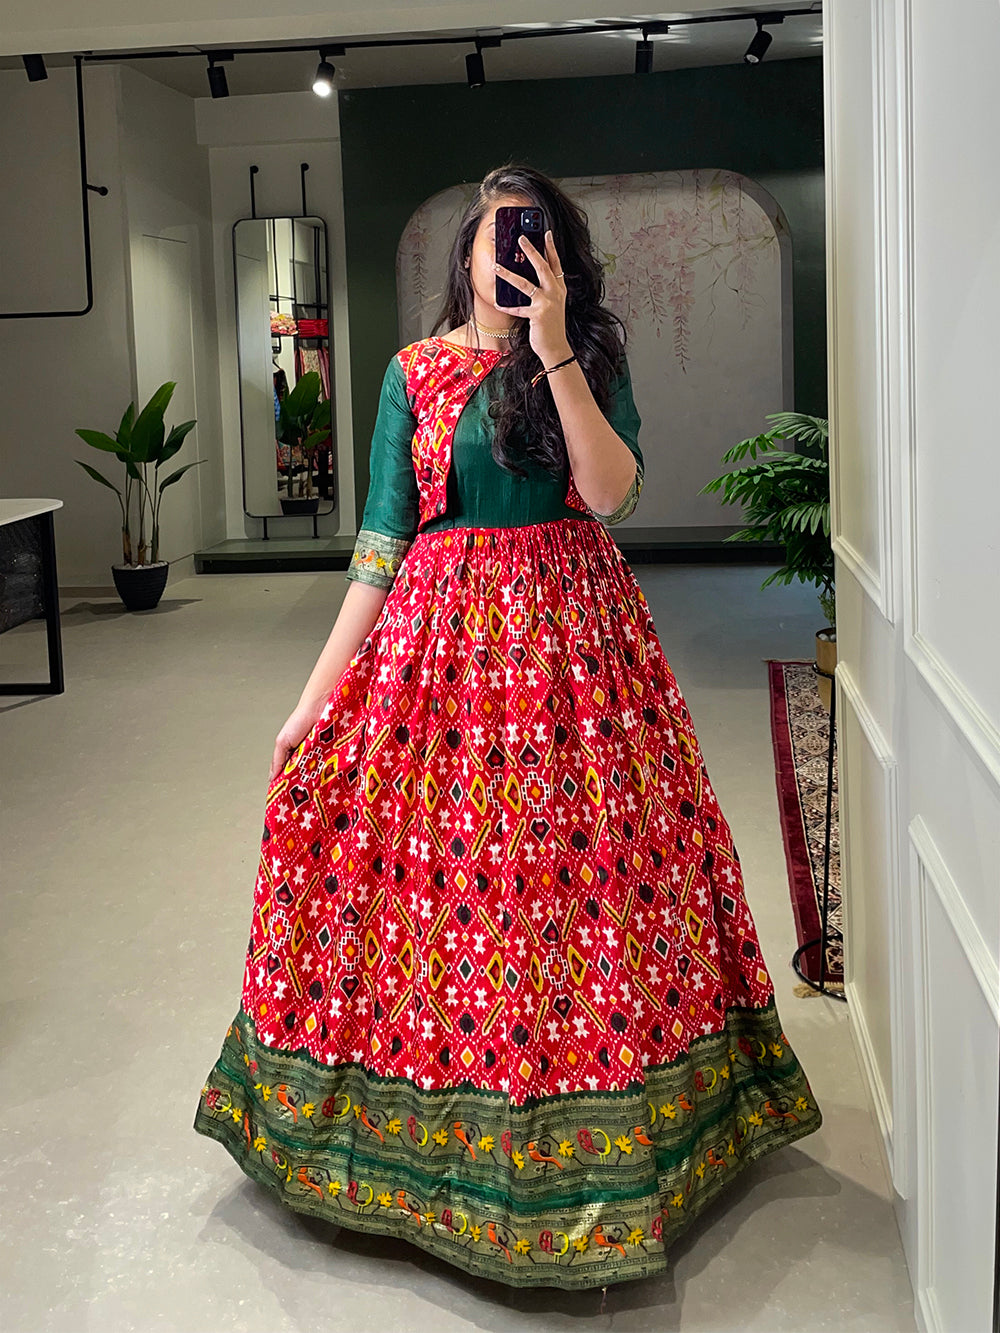 EXCLUSIVE COLLECTION OF POCHAMPALLY IKKAT PURE SILK ADULTS SIZE LEHENGAS  for more details please contact me  Ikkat dresses Frock models Designer  blouse patterns